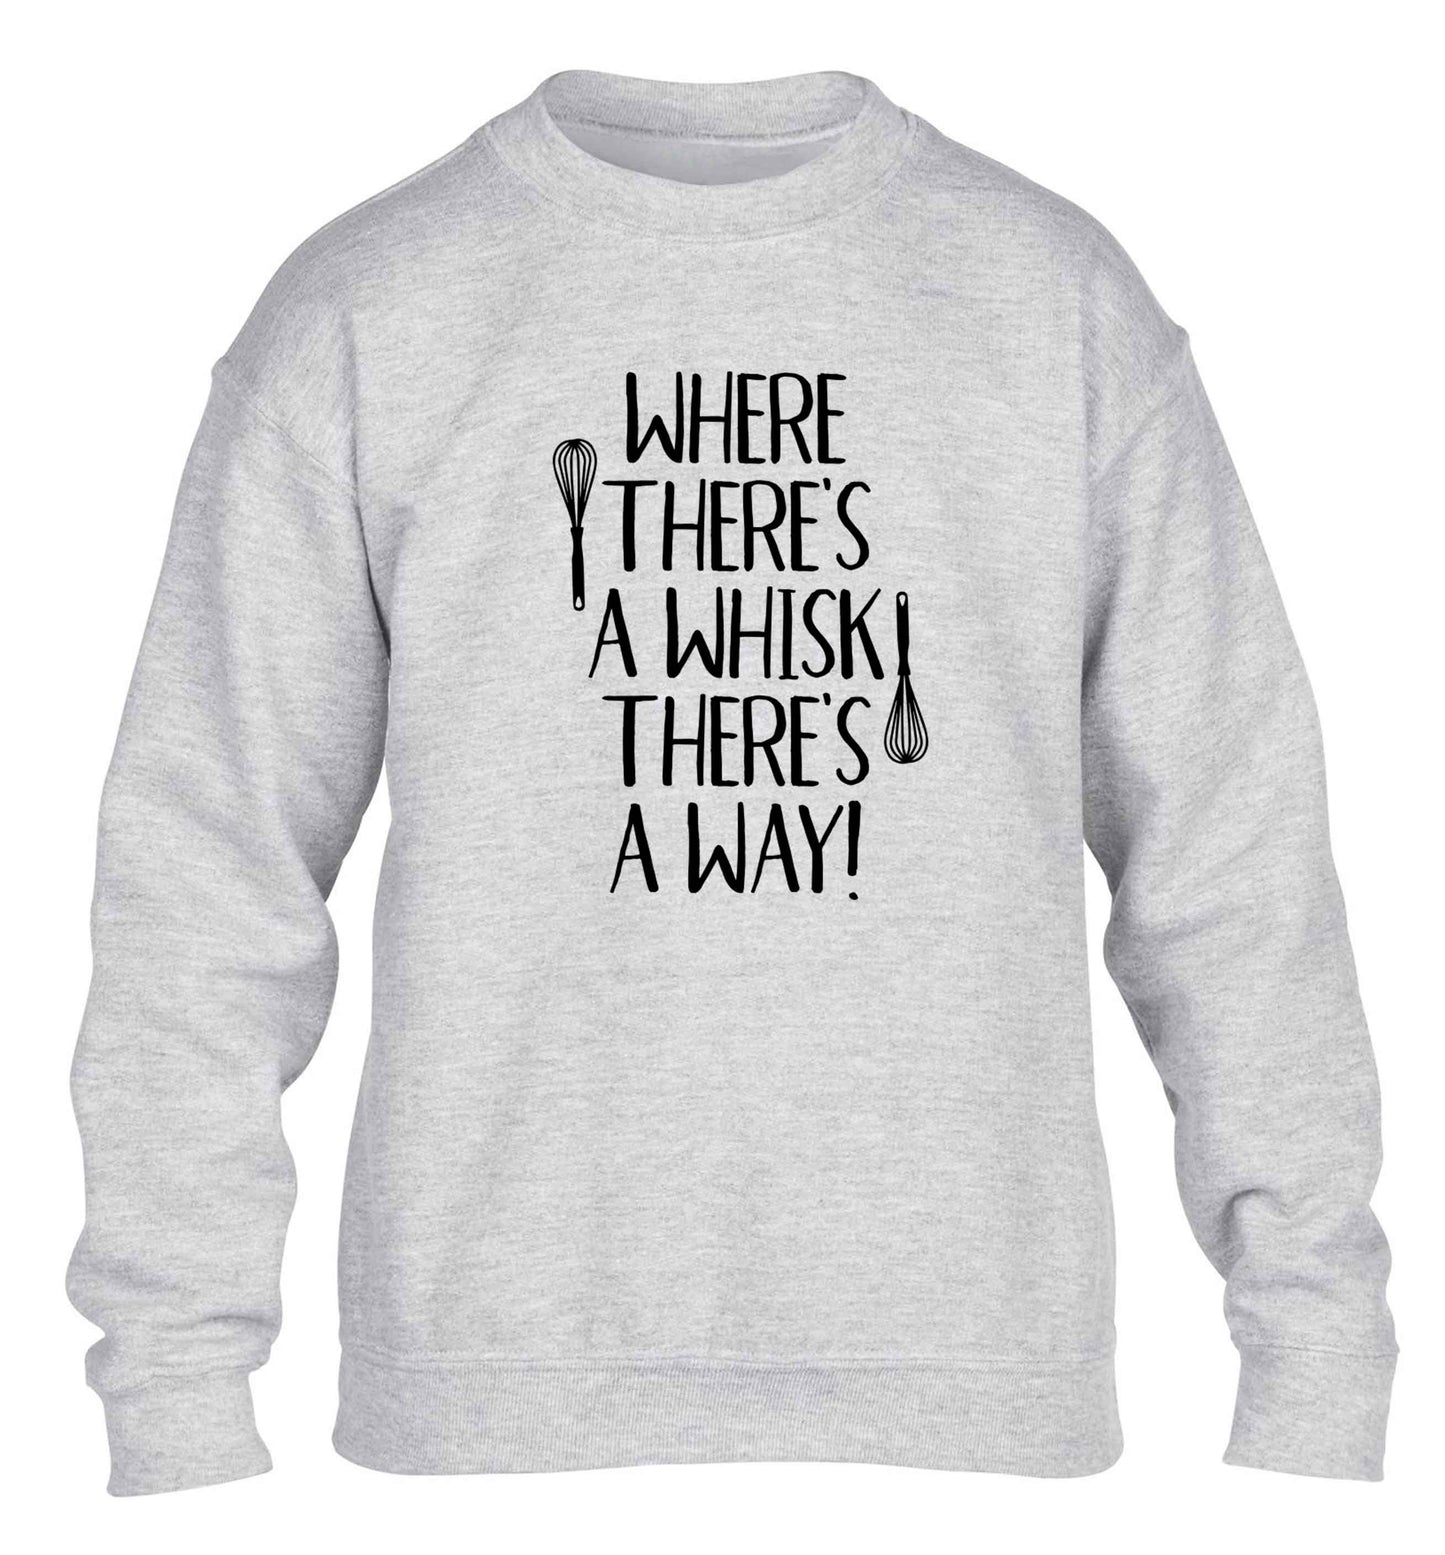 Where there's a whisk there's a way children's grey sweater 12-13 Years